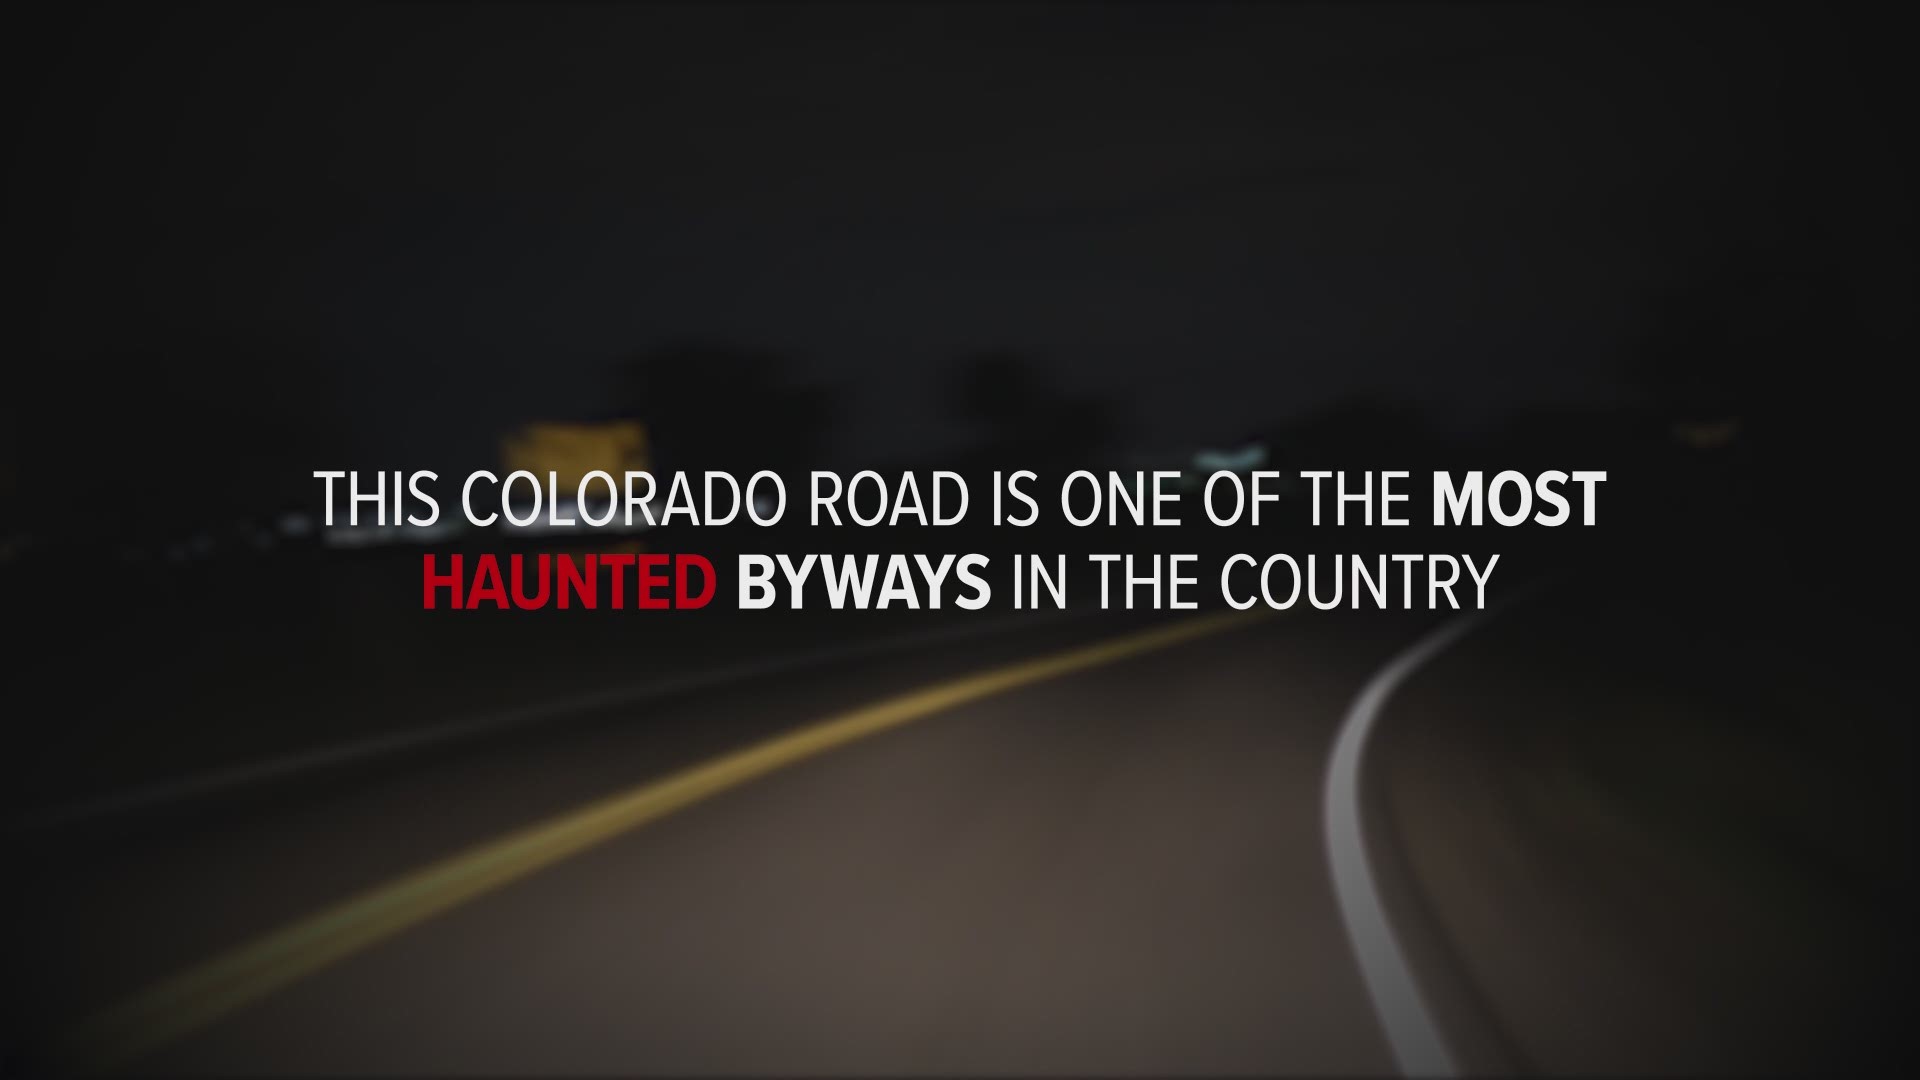 The 11-mile-long Riverdale Road between Thornton & Brighton, Colorado is home to urban legends and is considered one of the most haunted roads by ghost hunters.